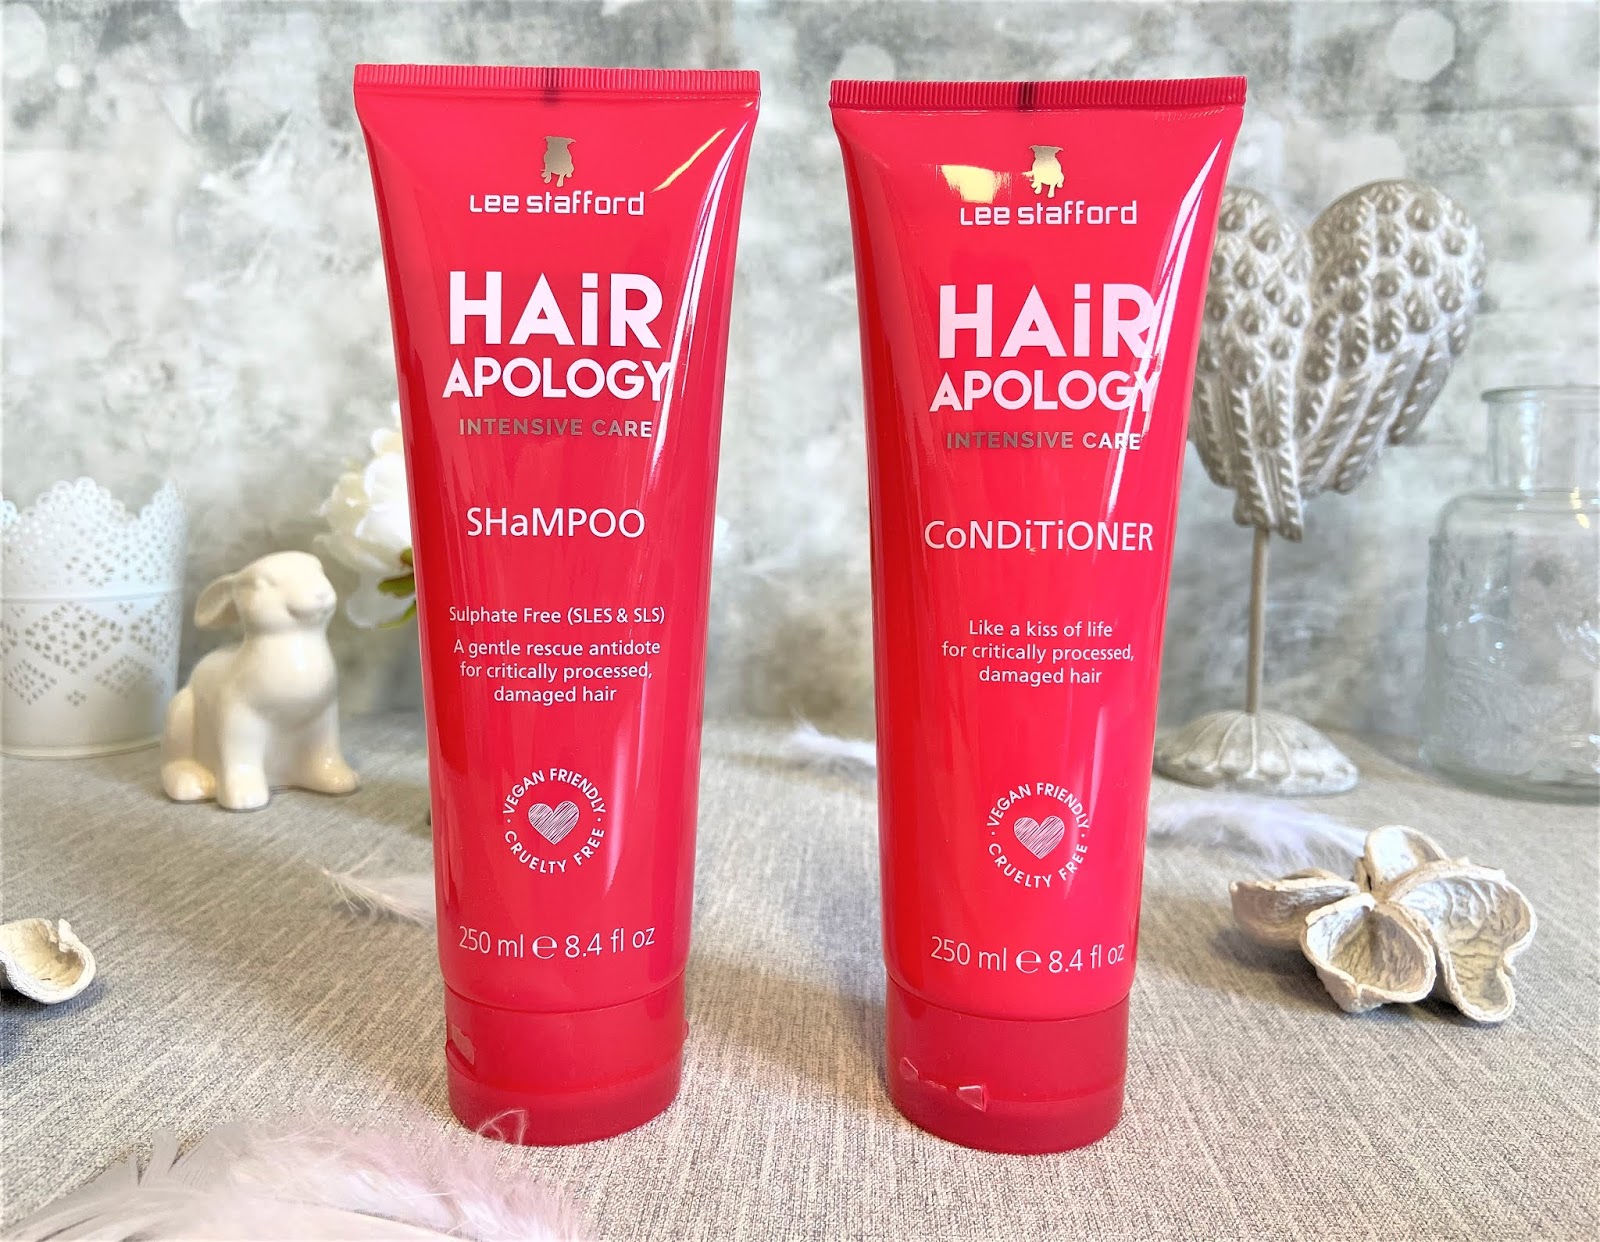 Lee Stafford Hair Apology Intensive Care Haircare Review | Kathryn's Loves